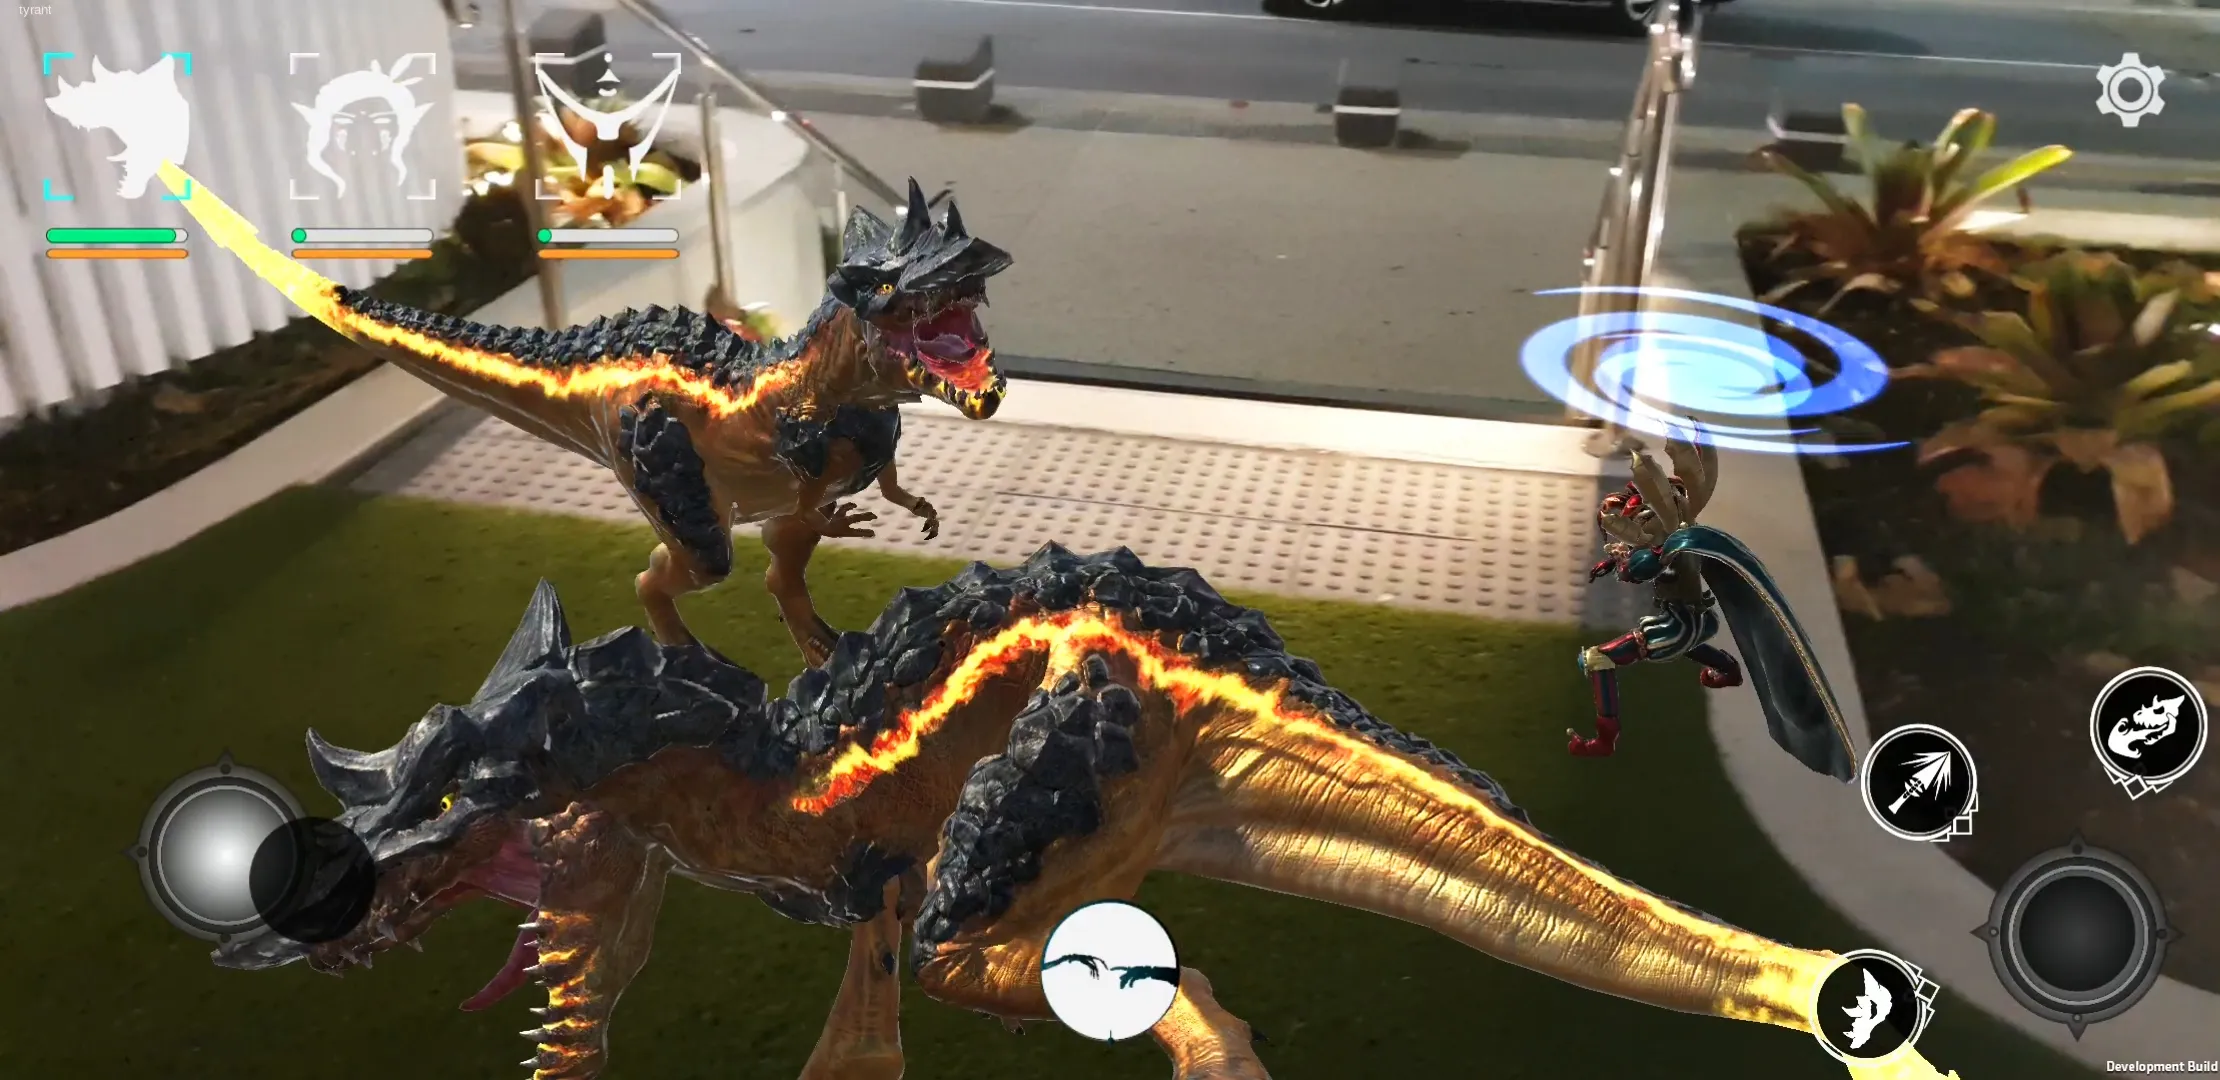 How to Play AR TCG. Giant orange dinosaur and red clown fighting on grass in augmented reality.